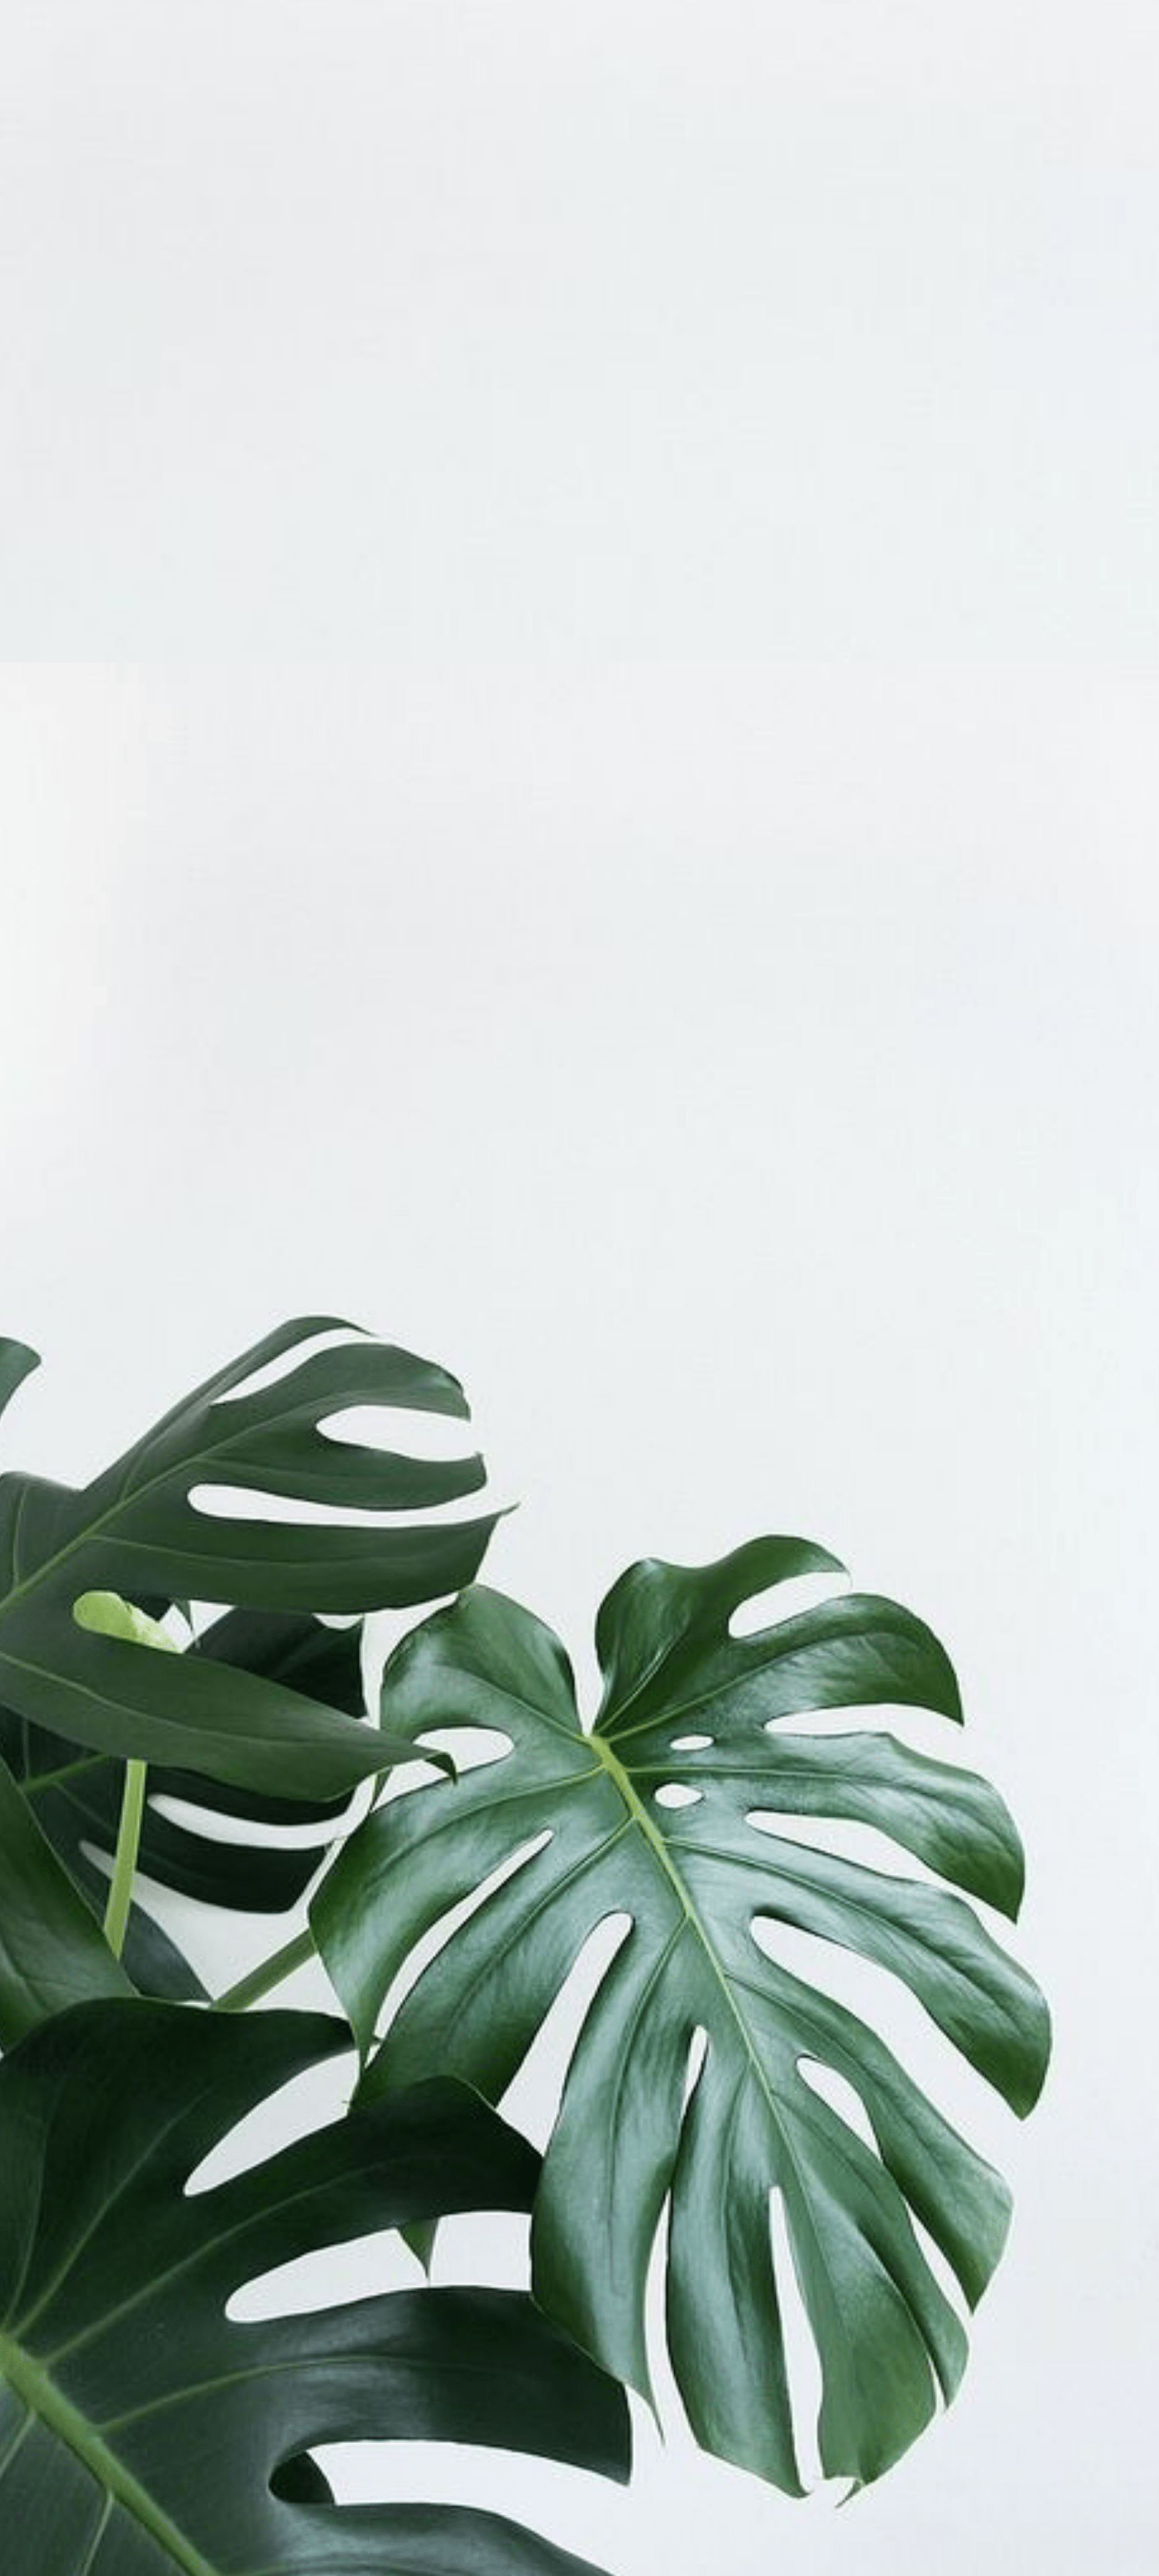 Plant Aesthetic Phone Wallpapers   Top Free Plant Aesthetic Phone ...